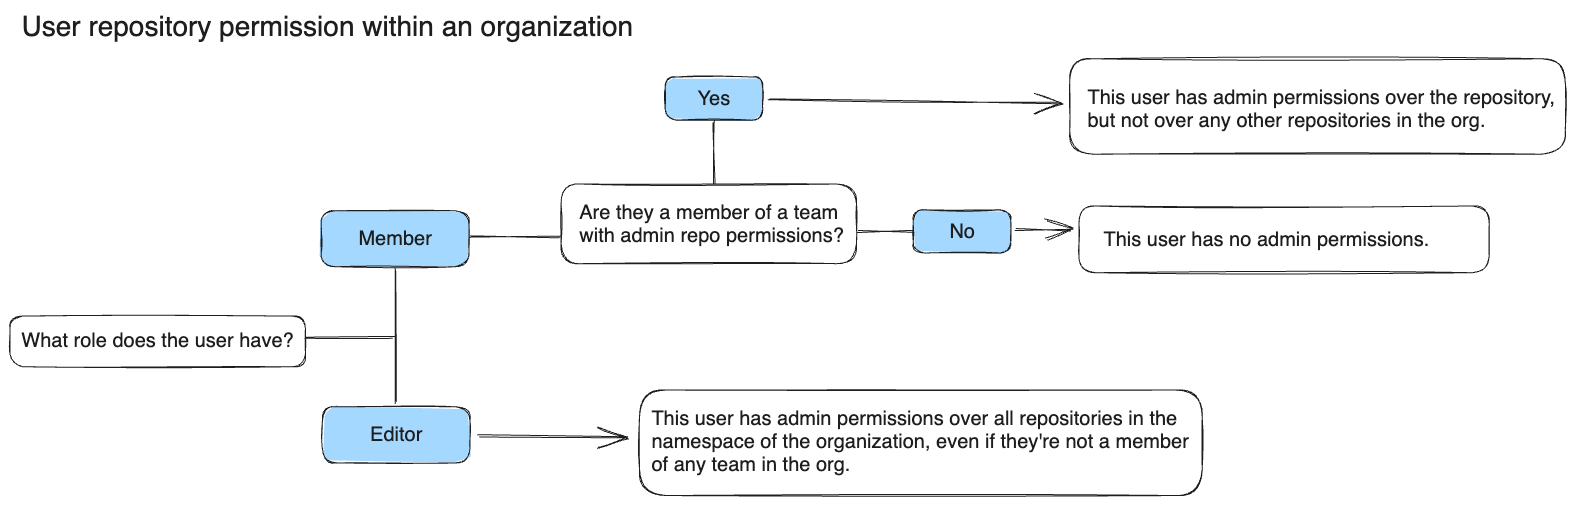 User repository permissions within an organization